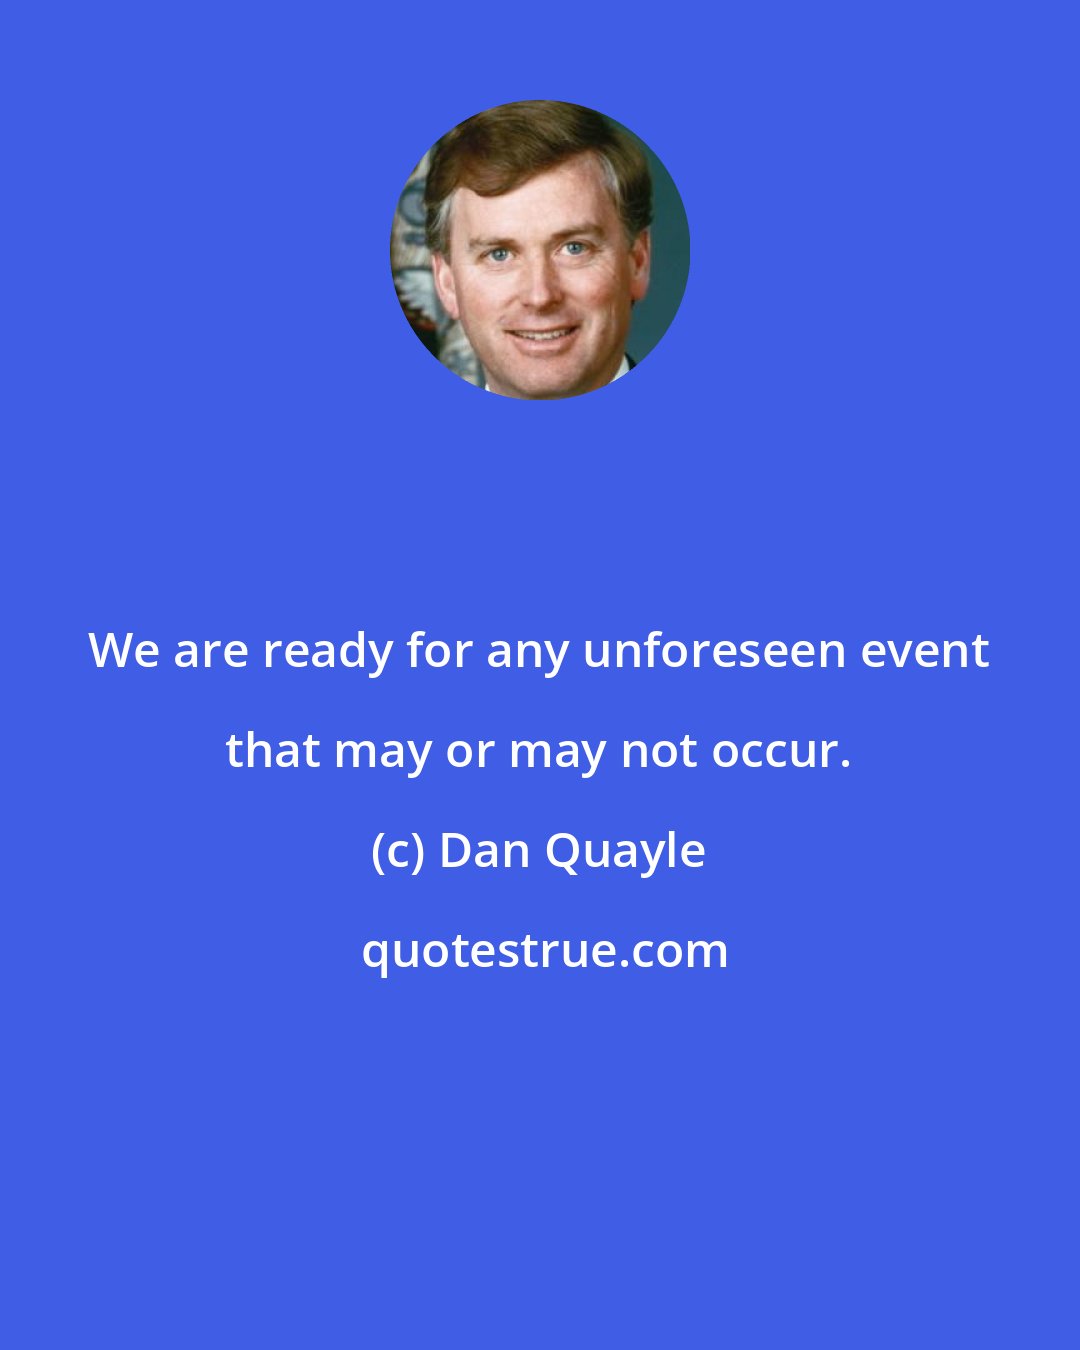 Dan Quayle: We are ready for any unforeseen event that may or may not occur.